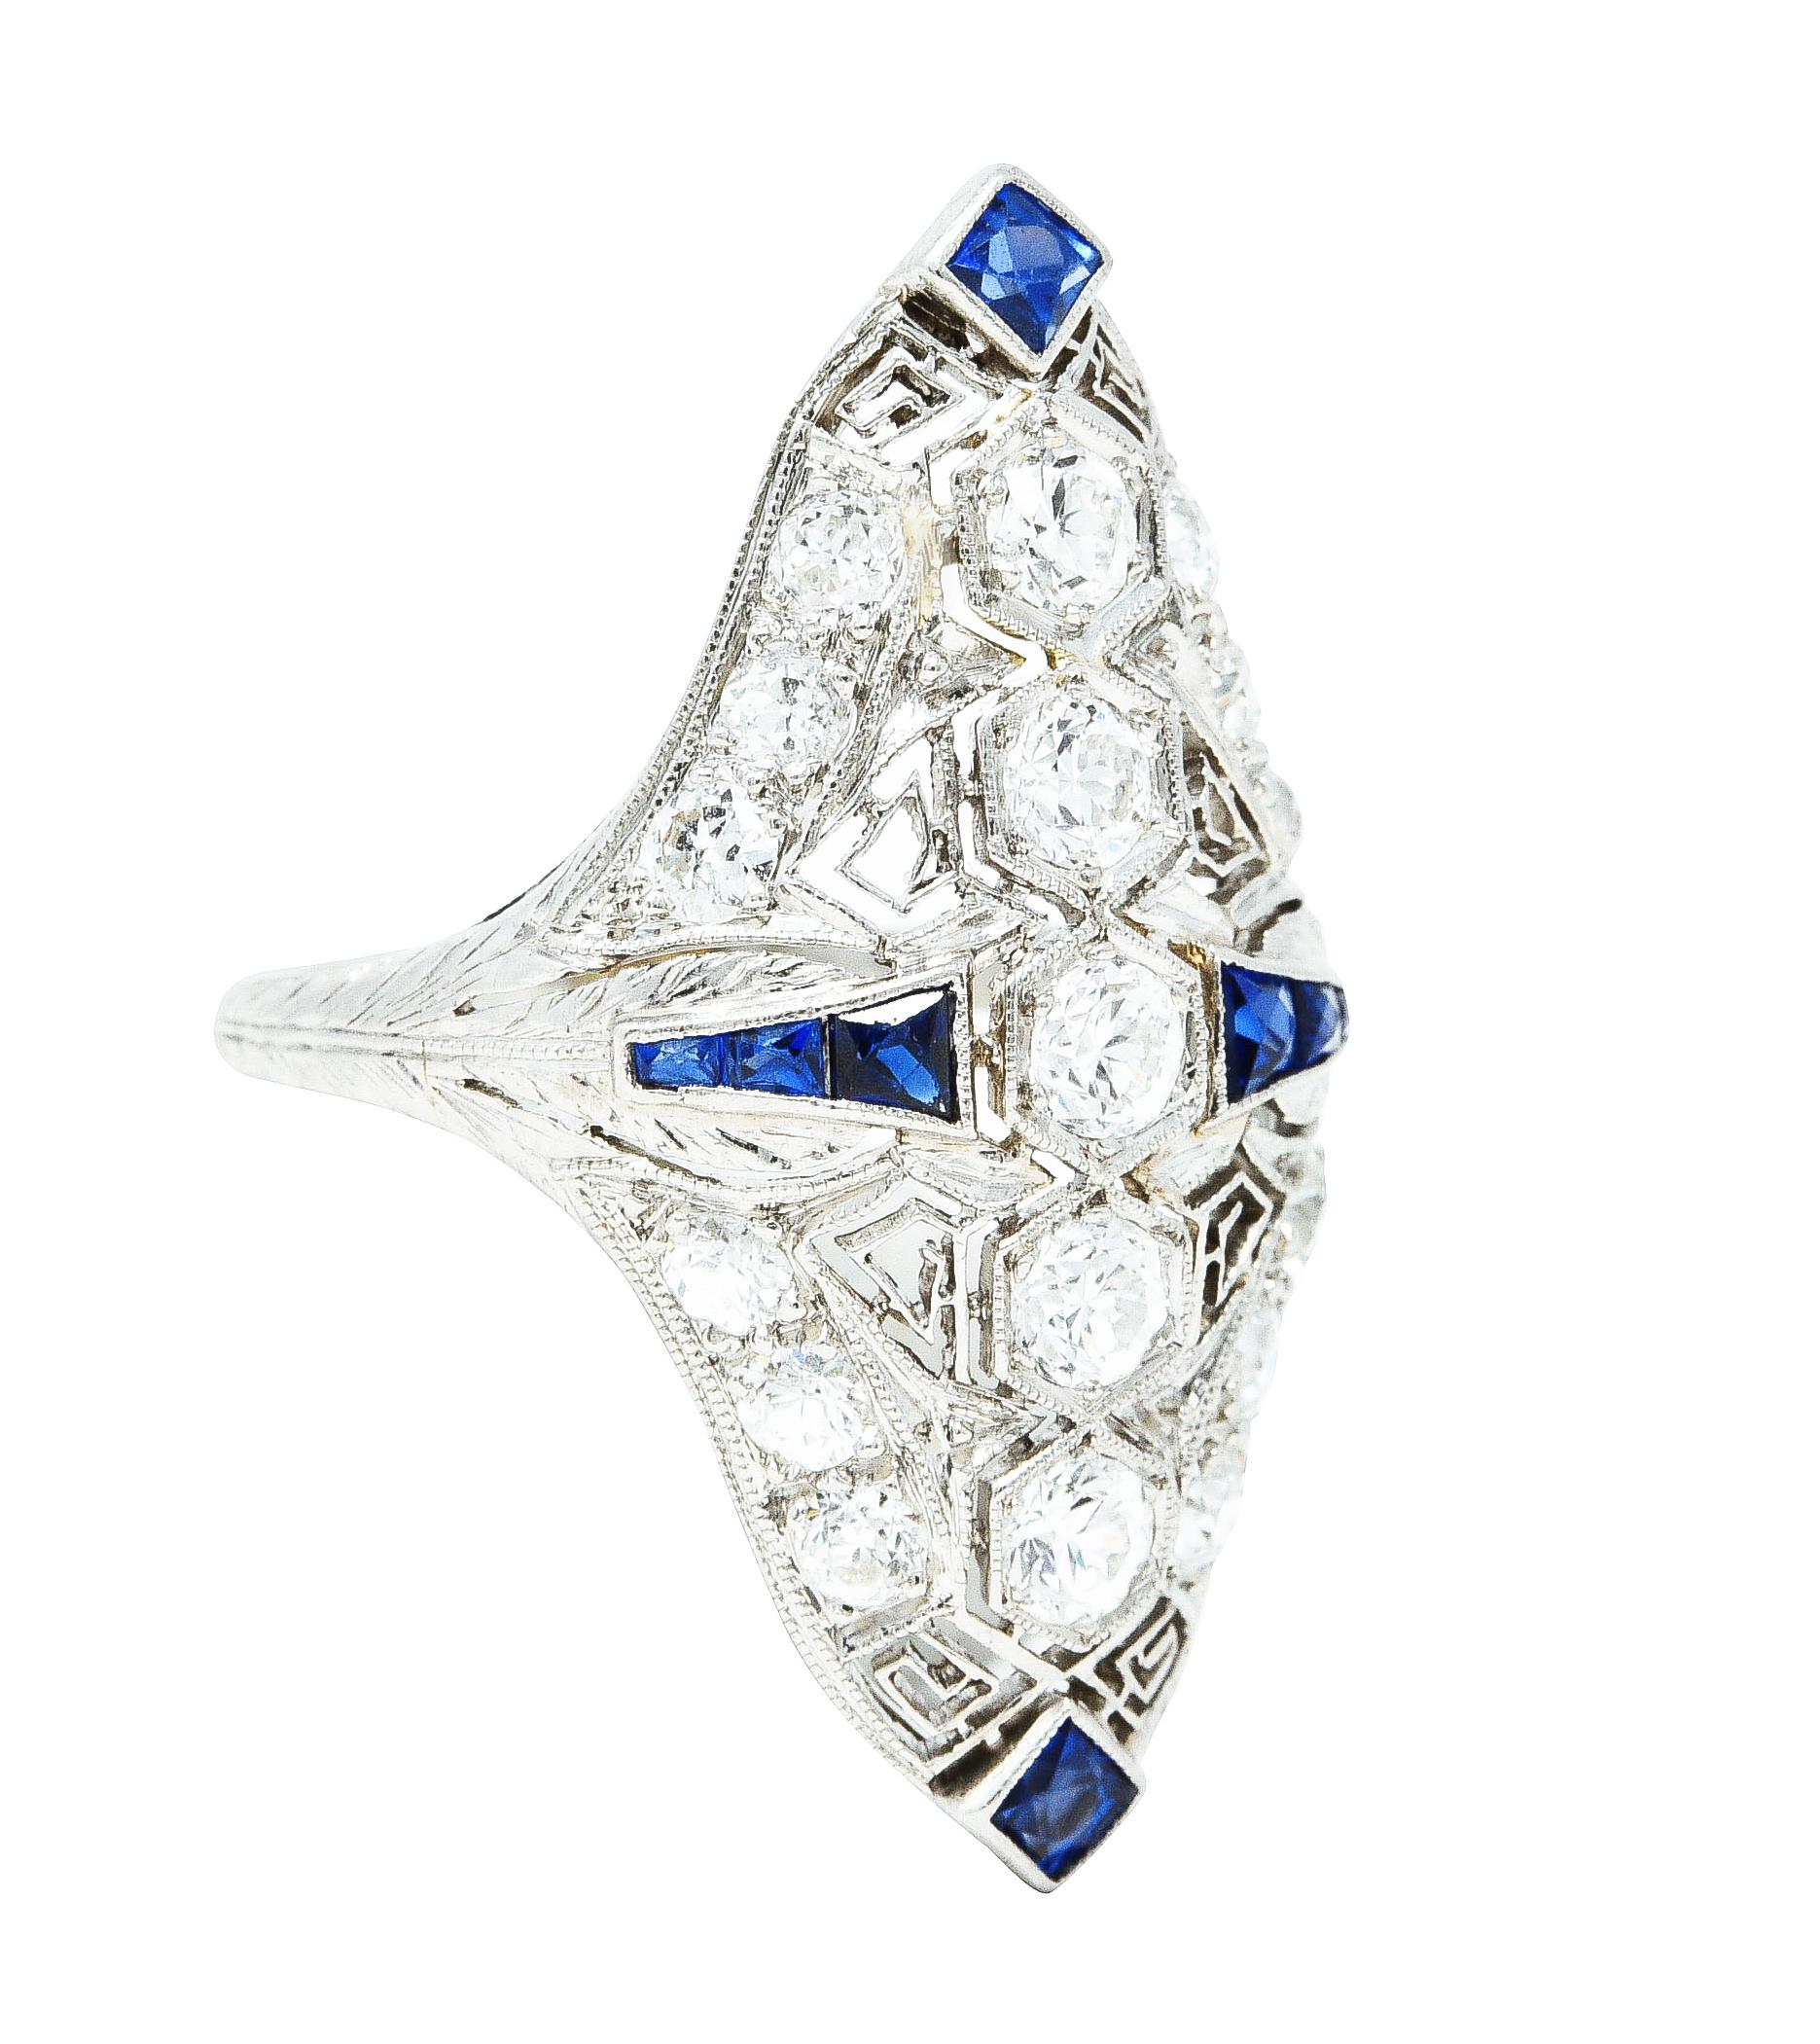 Dinner ring is designed as a navette form with pierced Greek key details. Centering a row of hexagonal forms set with old European cut diamonds. With calibré cut synthetic sapphire at each cardinal point - bright royal blue. Additional old European